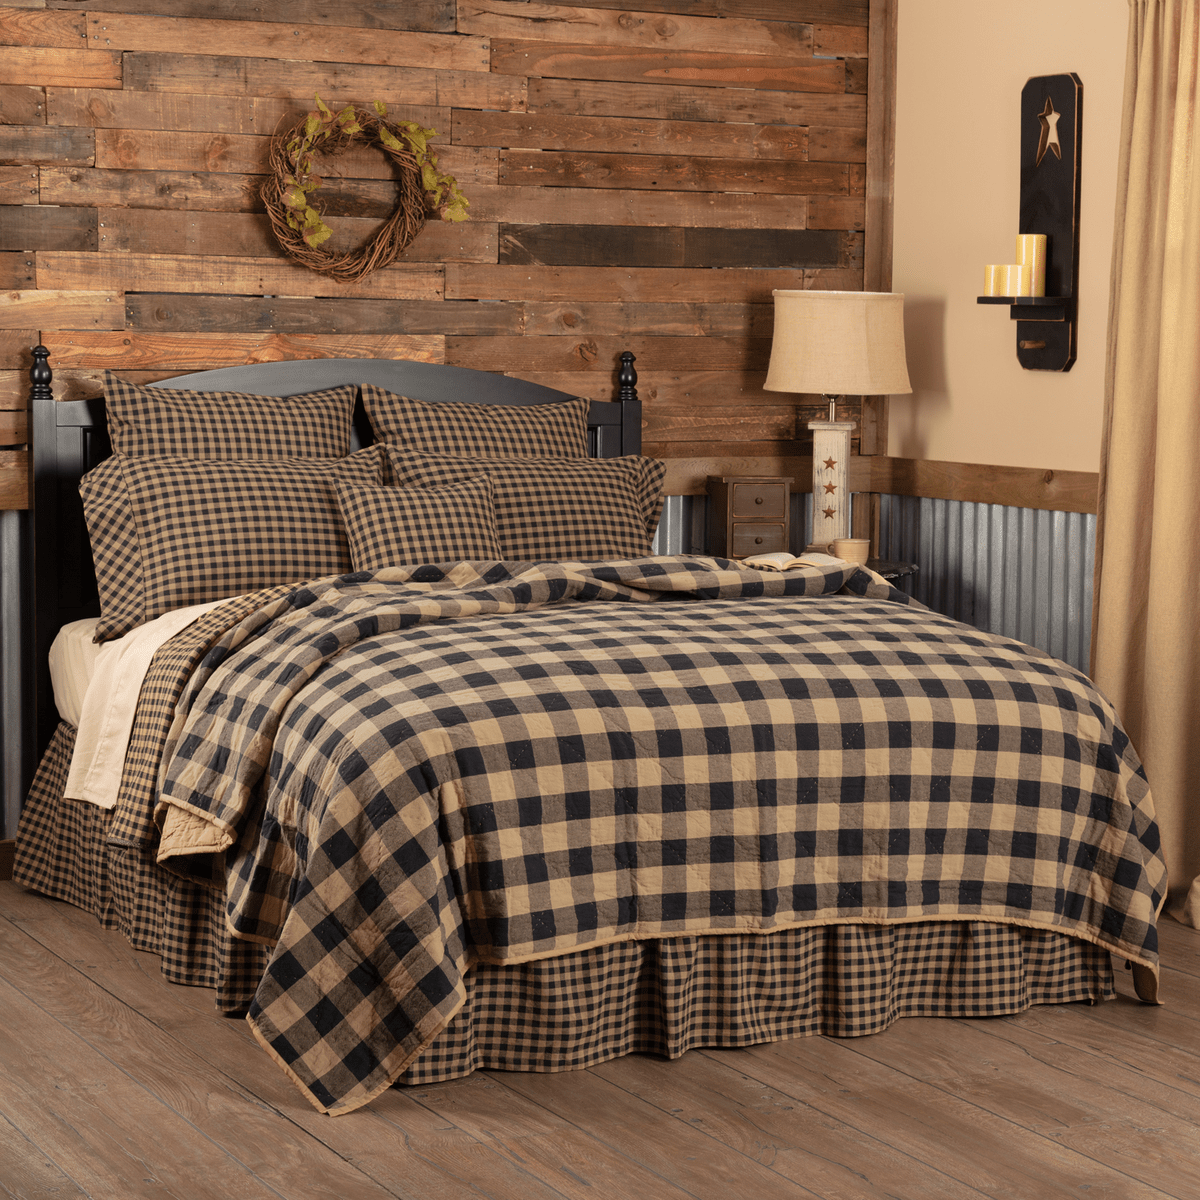 Black Check Quilted Coverlet Retro Barn Country Linens